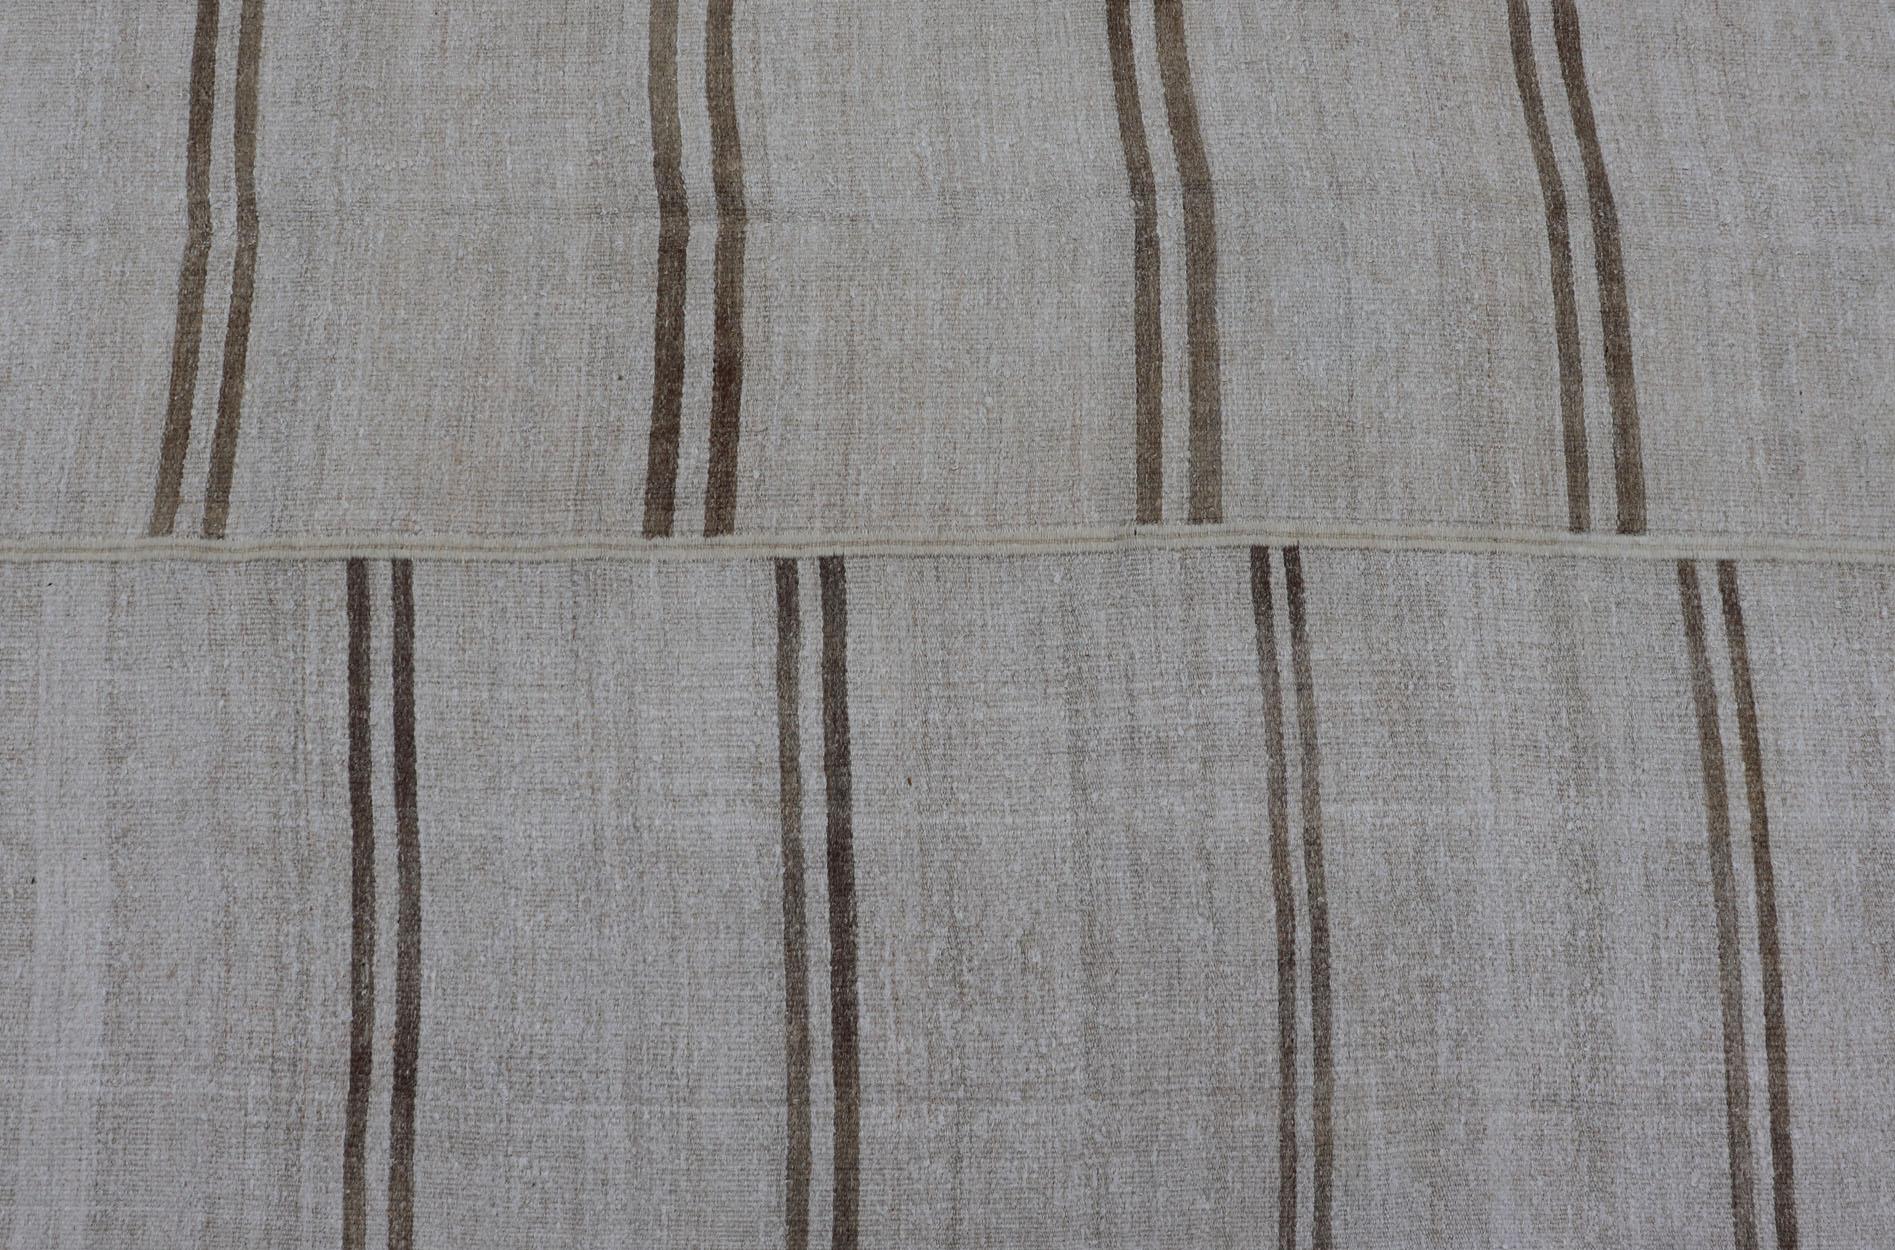 Hand-Woven Large Vintage Paneled Kilim Flat-Weave Stripe in Neutral Tones of Cream & Brown For Sale